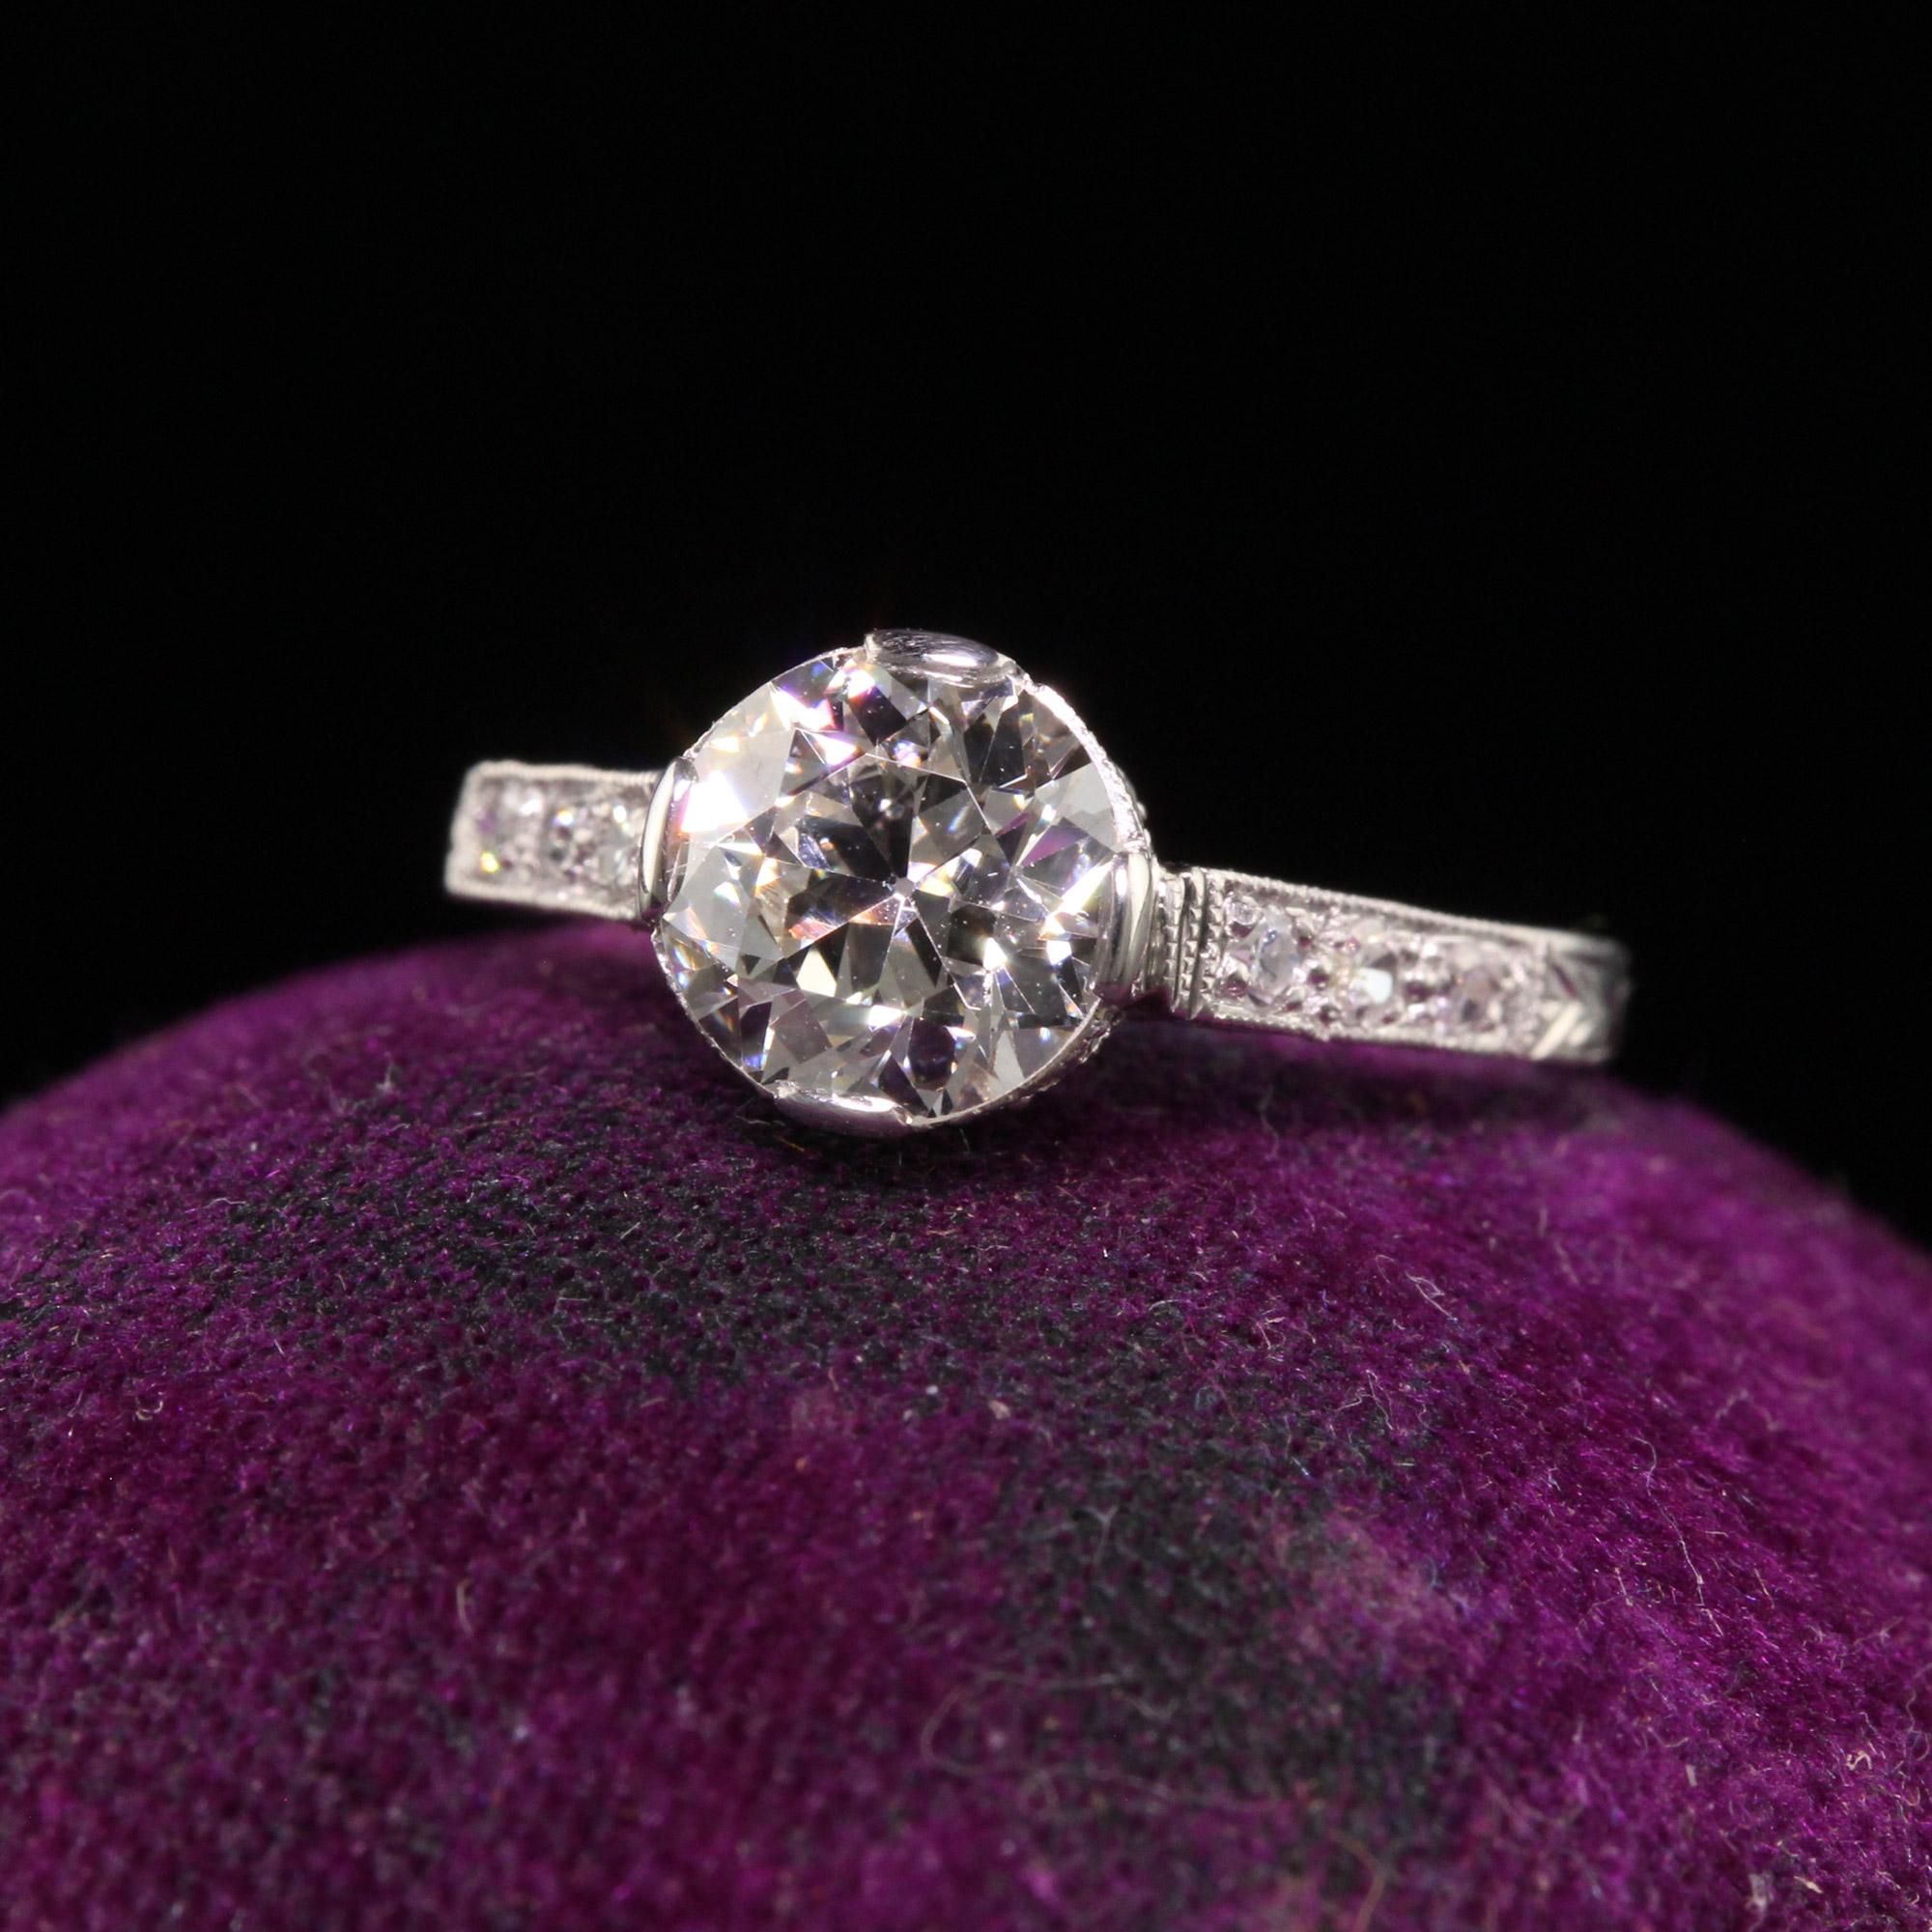 Beautiful Antique Art Deco Old European Cut Diamond Filigree Engagement Ring. This gorgeous engagement ring is crafted in platinum. The center holds a beautiful old european cut diamond and is set in a gorgeous Art Deco mounting that is in great